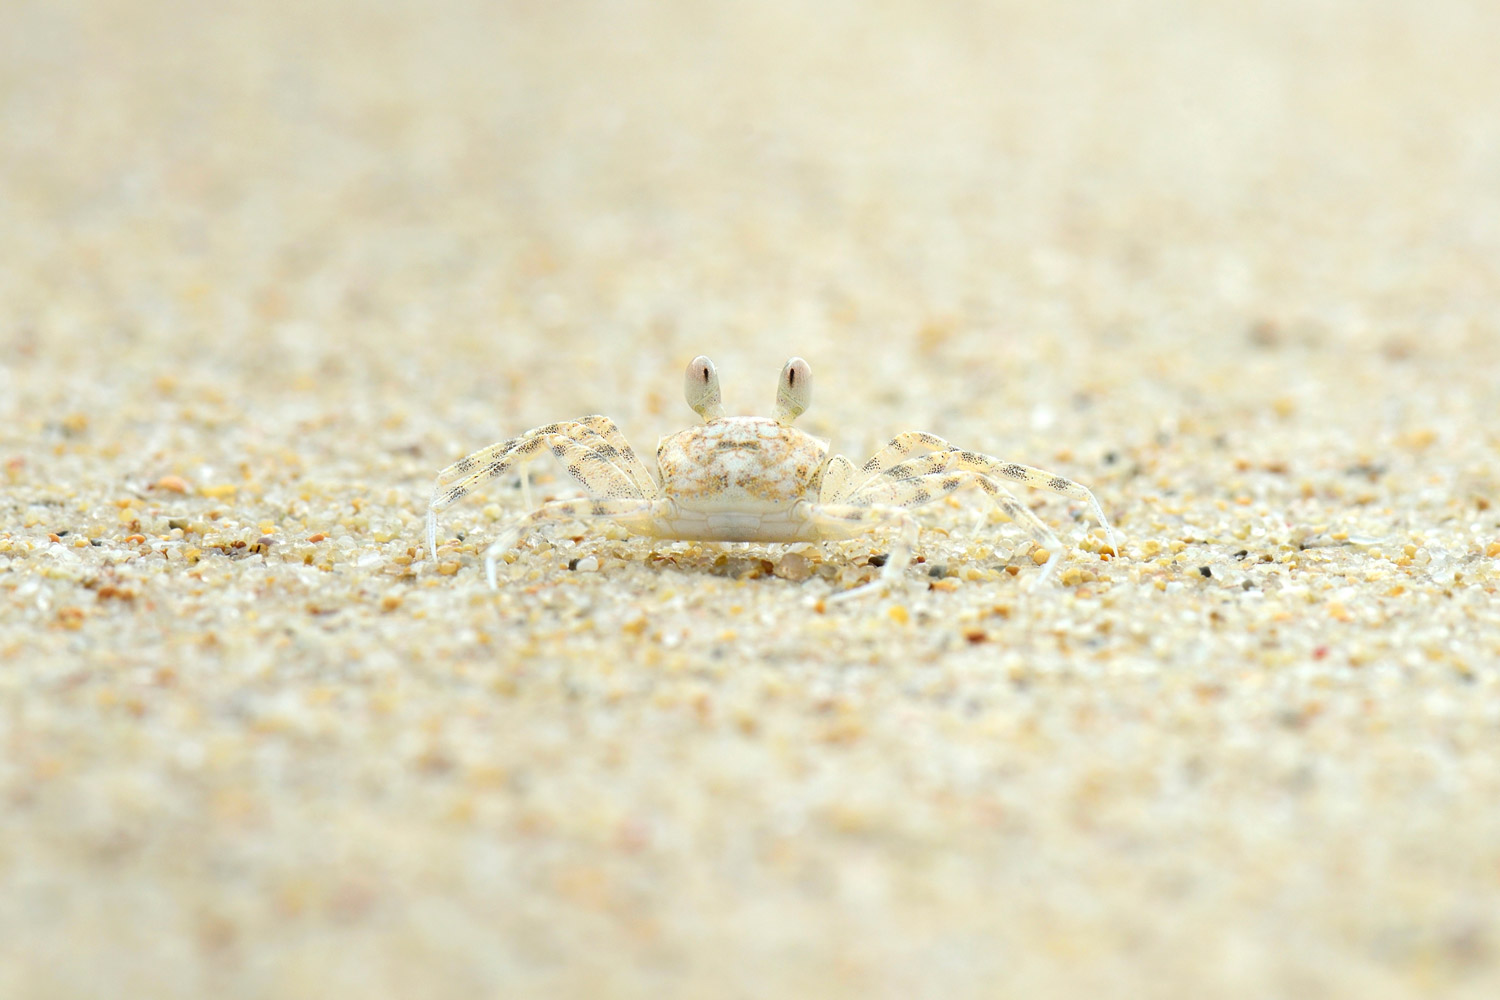 Ghost Crab, Javier Herranz Casellas, The Royal Society of Biology annual photography competition